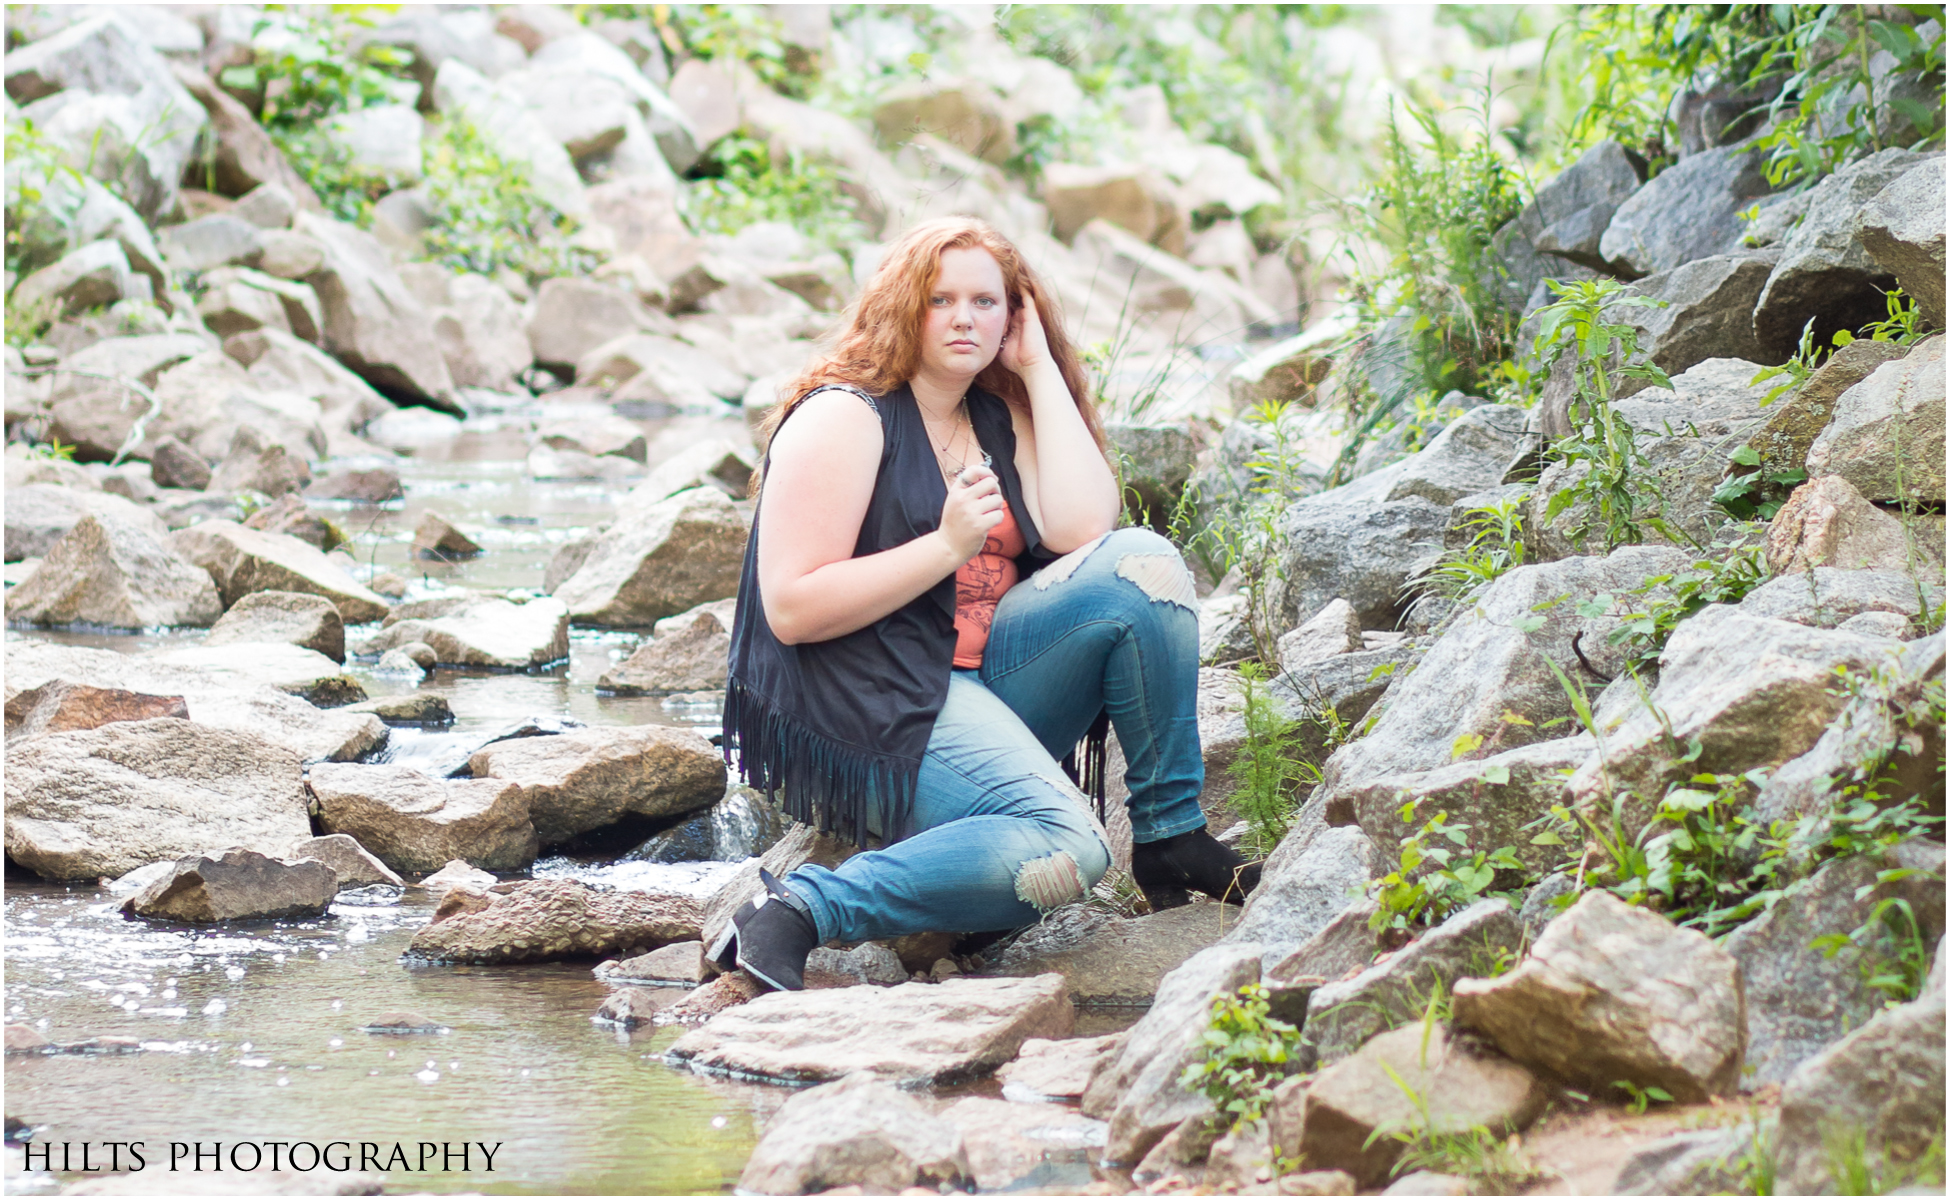 Hilts Photography Raleigh Senior Session -18